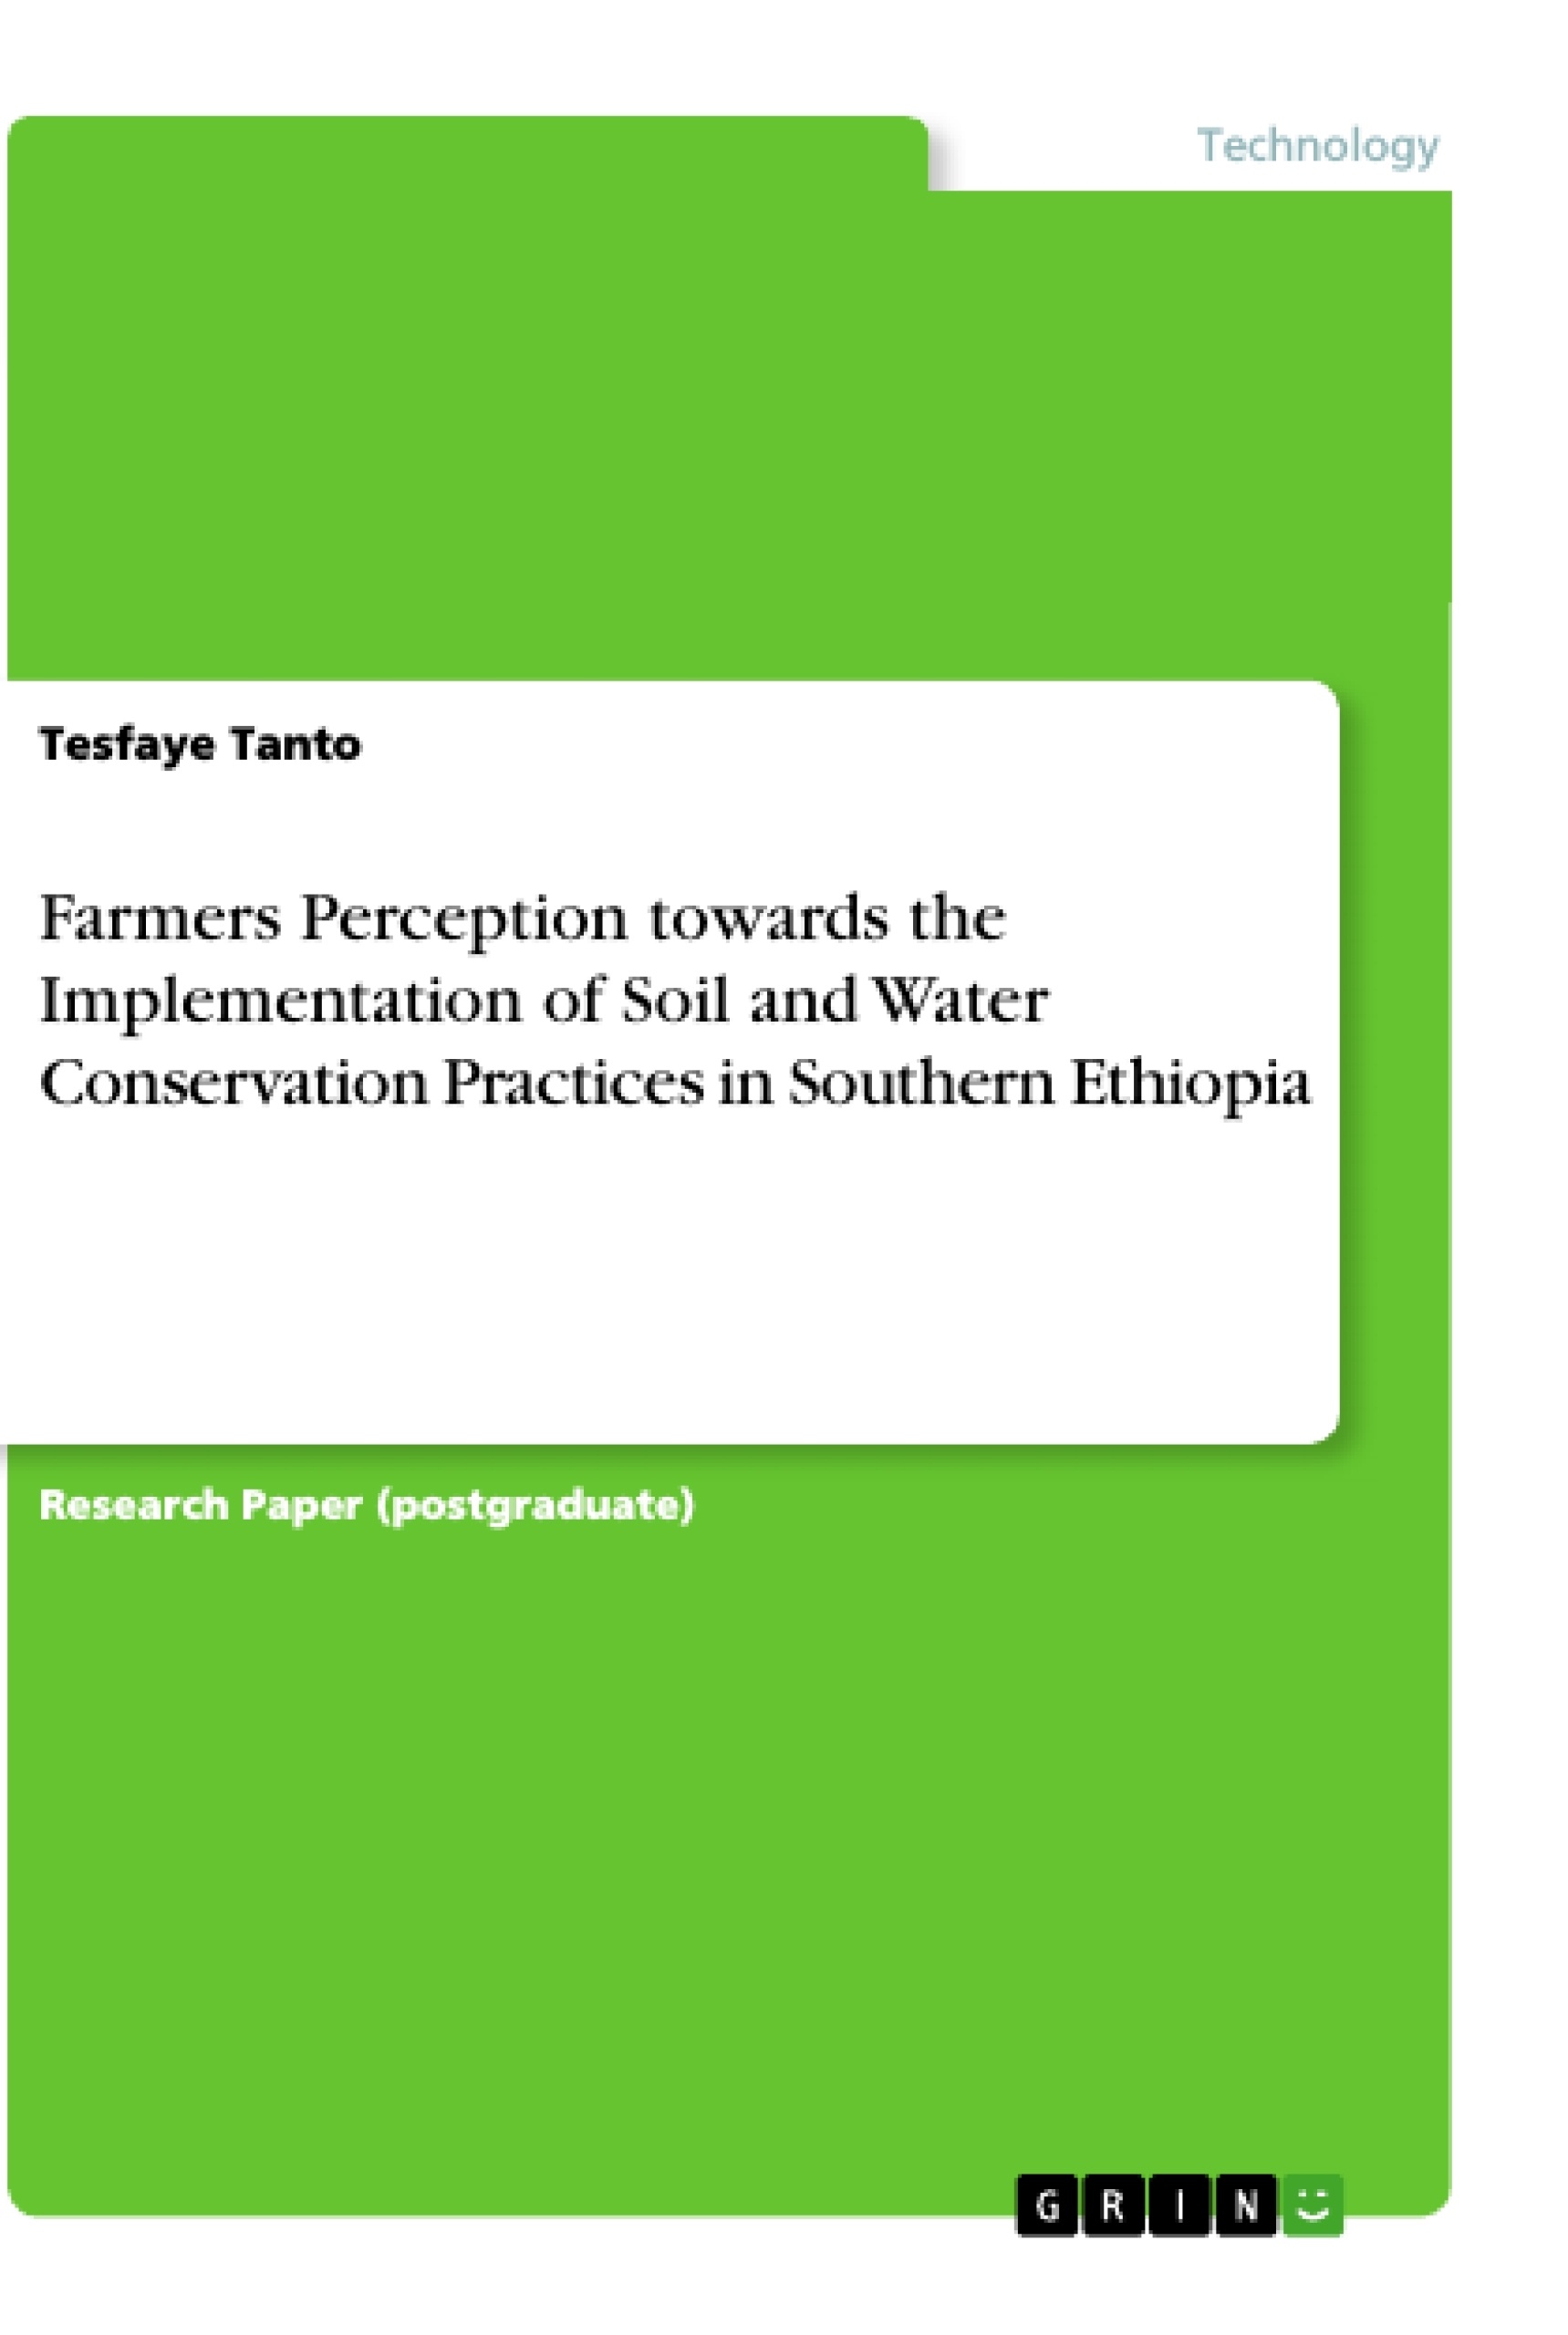 Title: Farmers Perception towards the Implementation of Soil and Water Conservation Practices in Southern Ethiopia